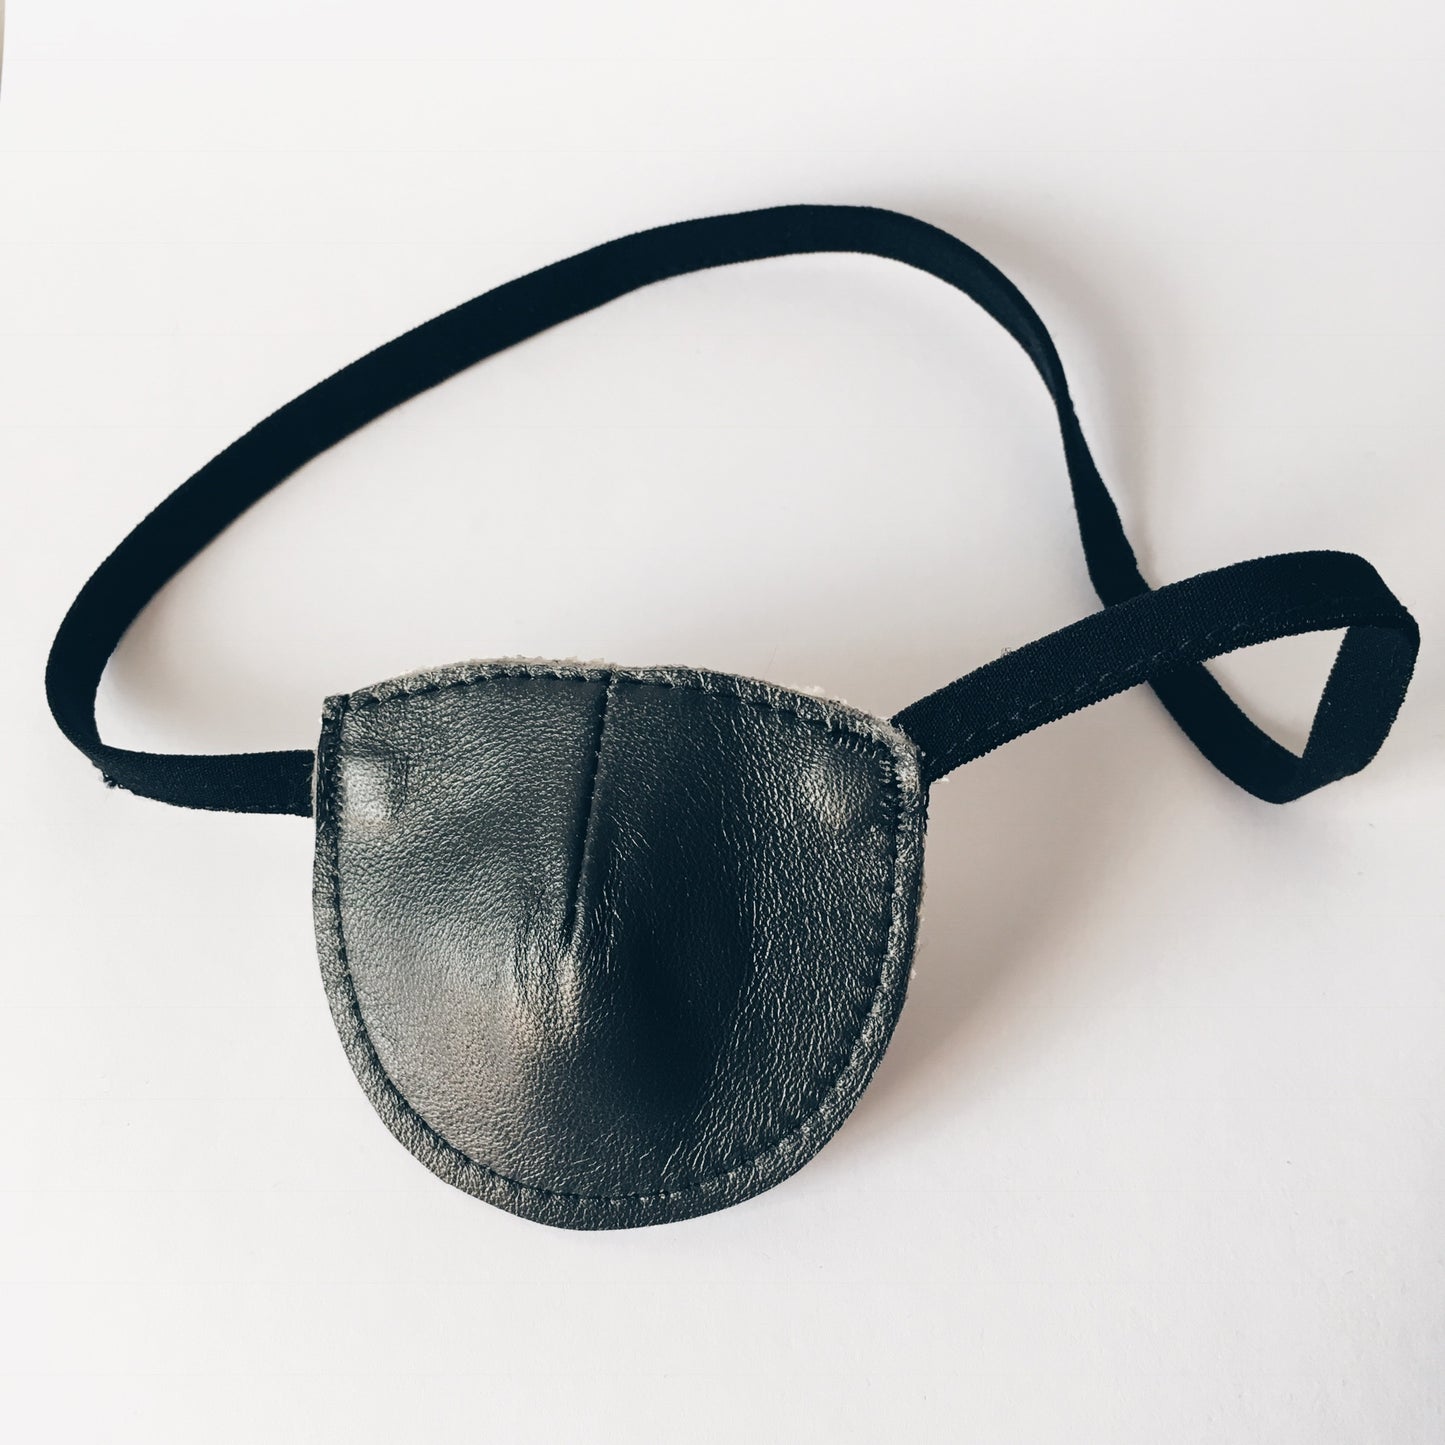 Leather Pirate eye patch by For Just ONE Day